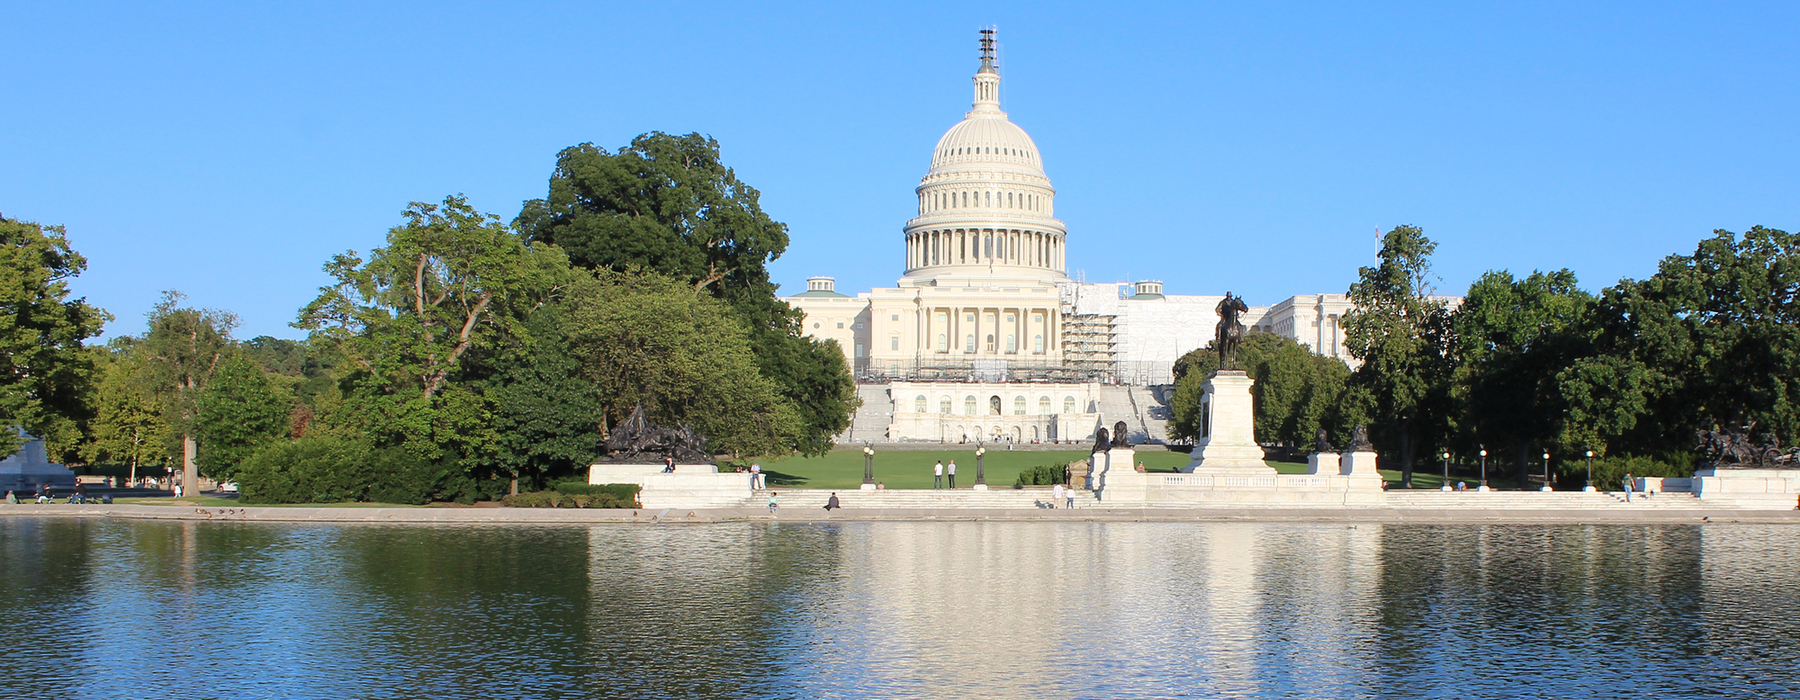 US Capitol building view from the west, with a reflecting pool in the foreground, with a blue sky behind the building